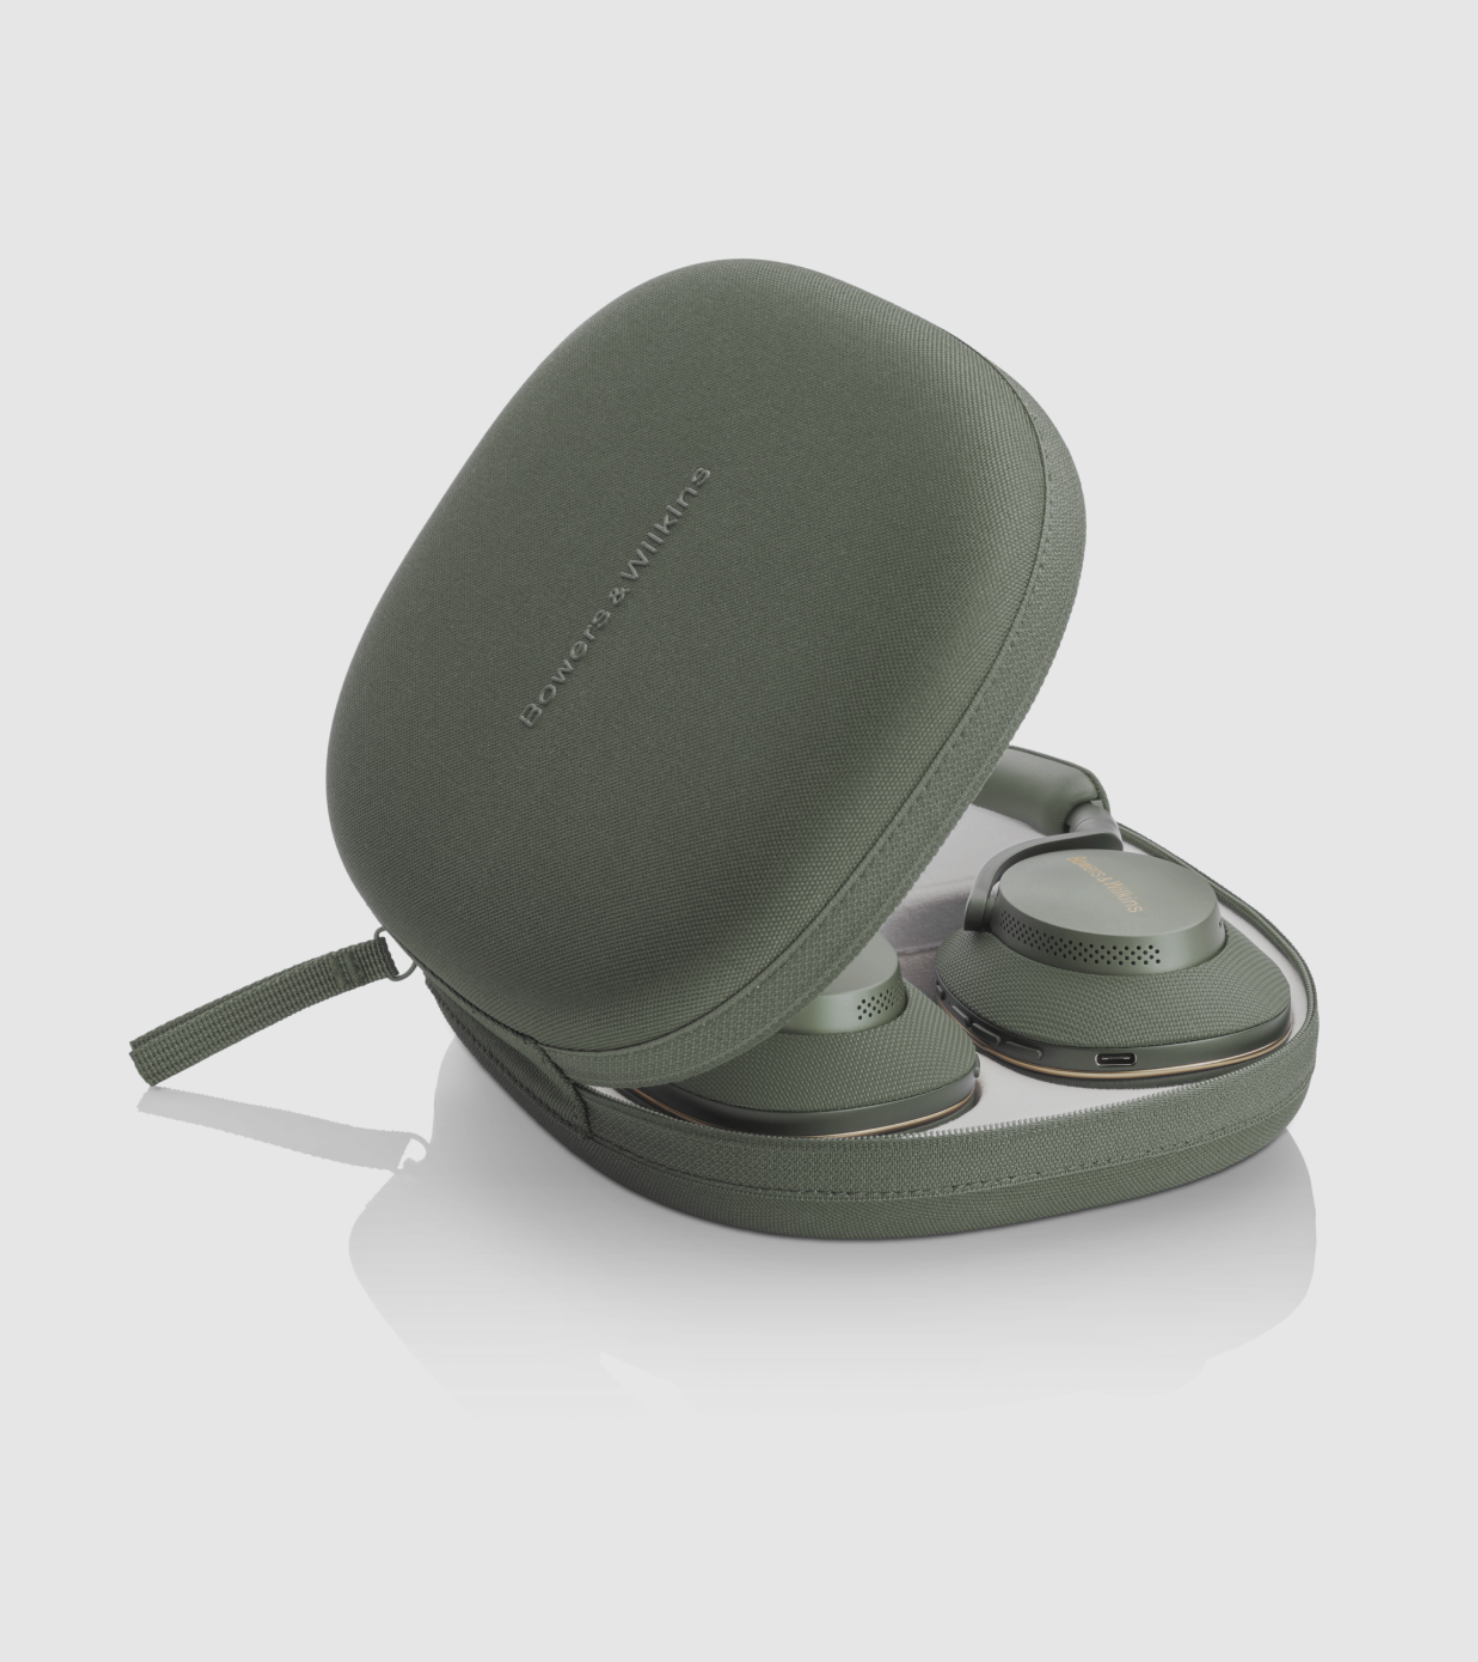 B&W Px7 S2e Noise Cancelling Headphones in Forest Green. Image in case